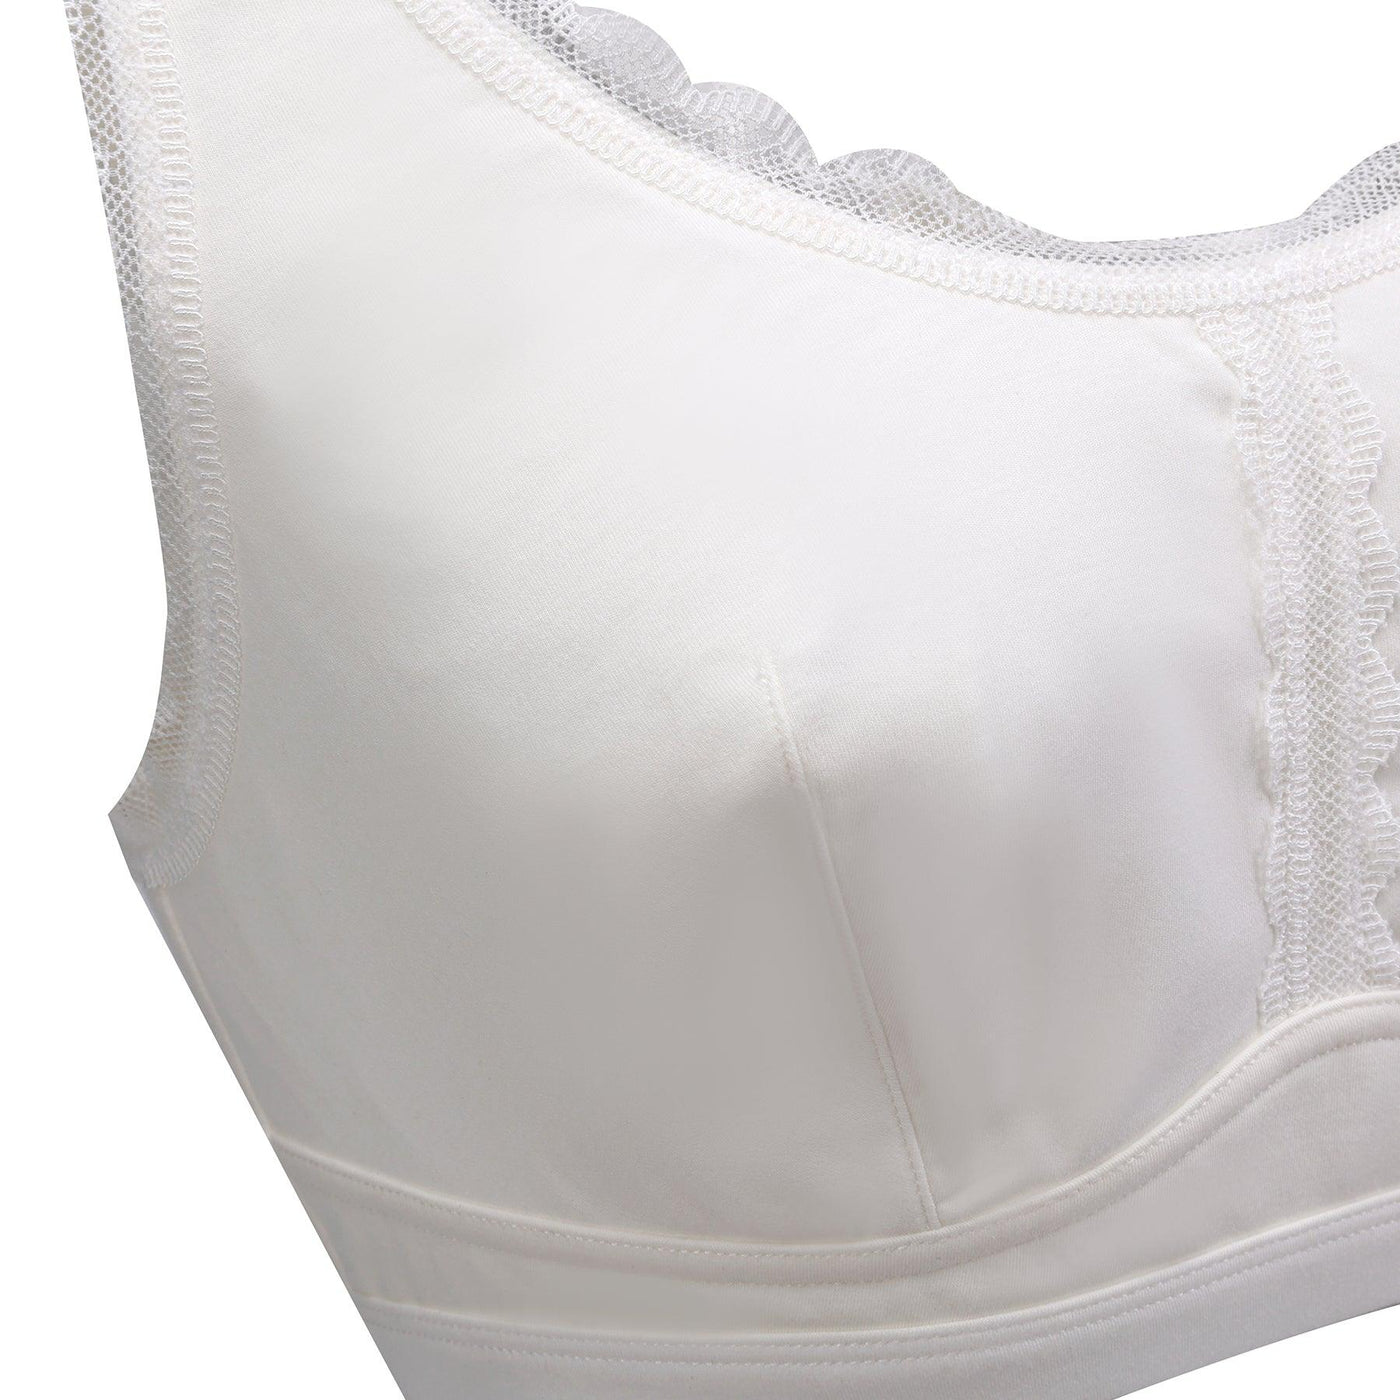 Back Support Full Coverage Wireless Organic Cotton Bra by Juliemay Lingerie